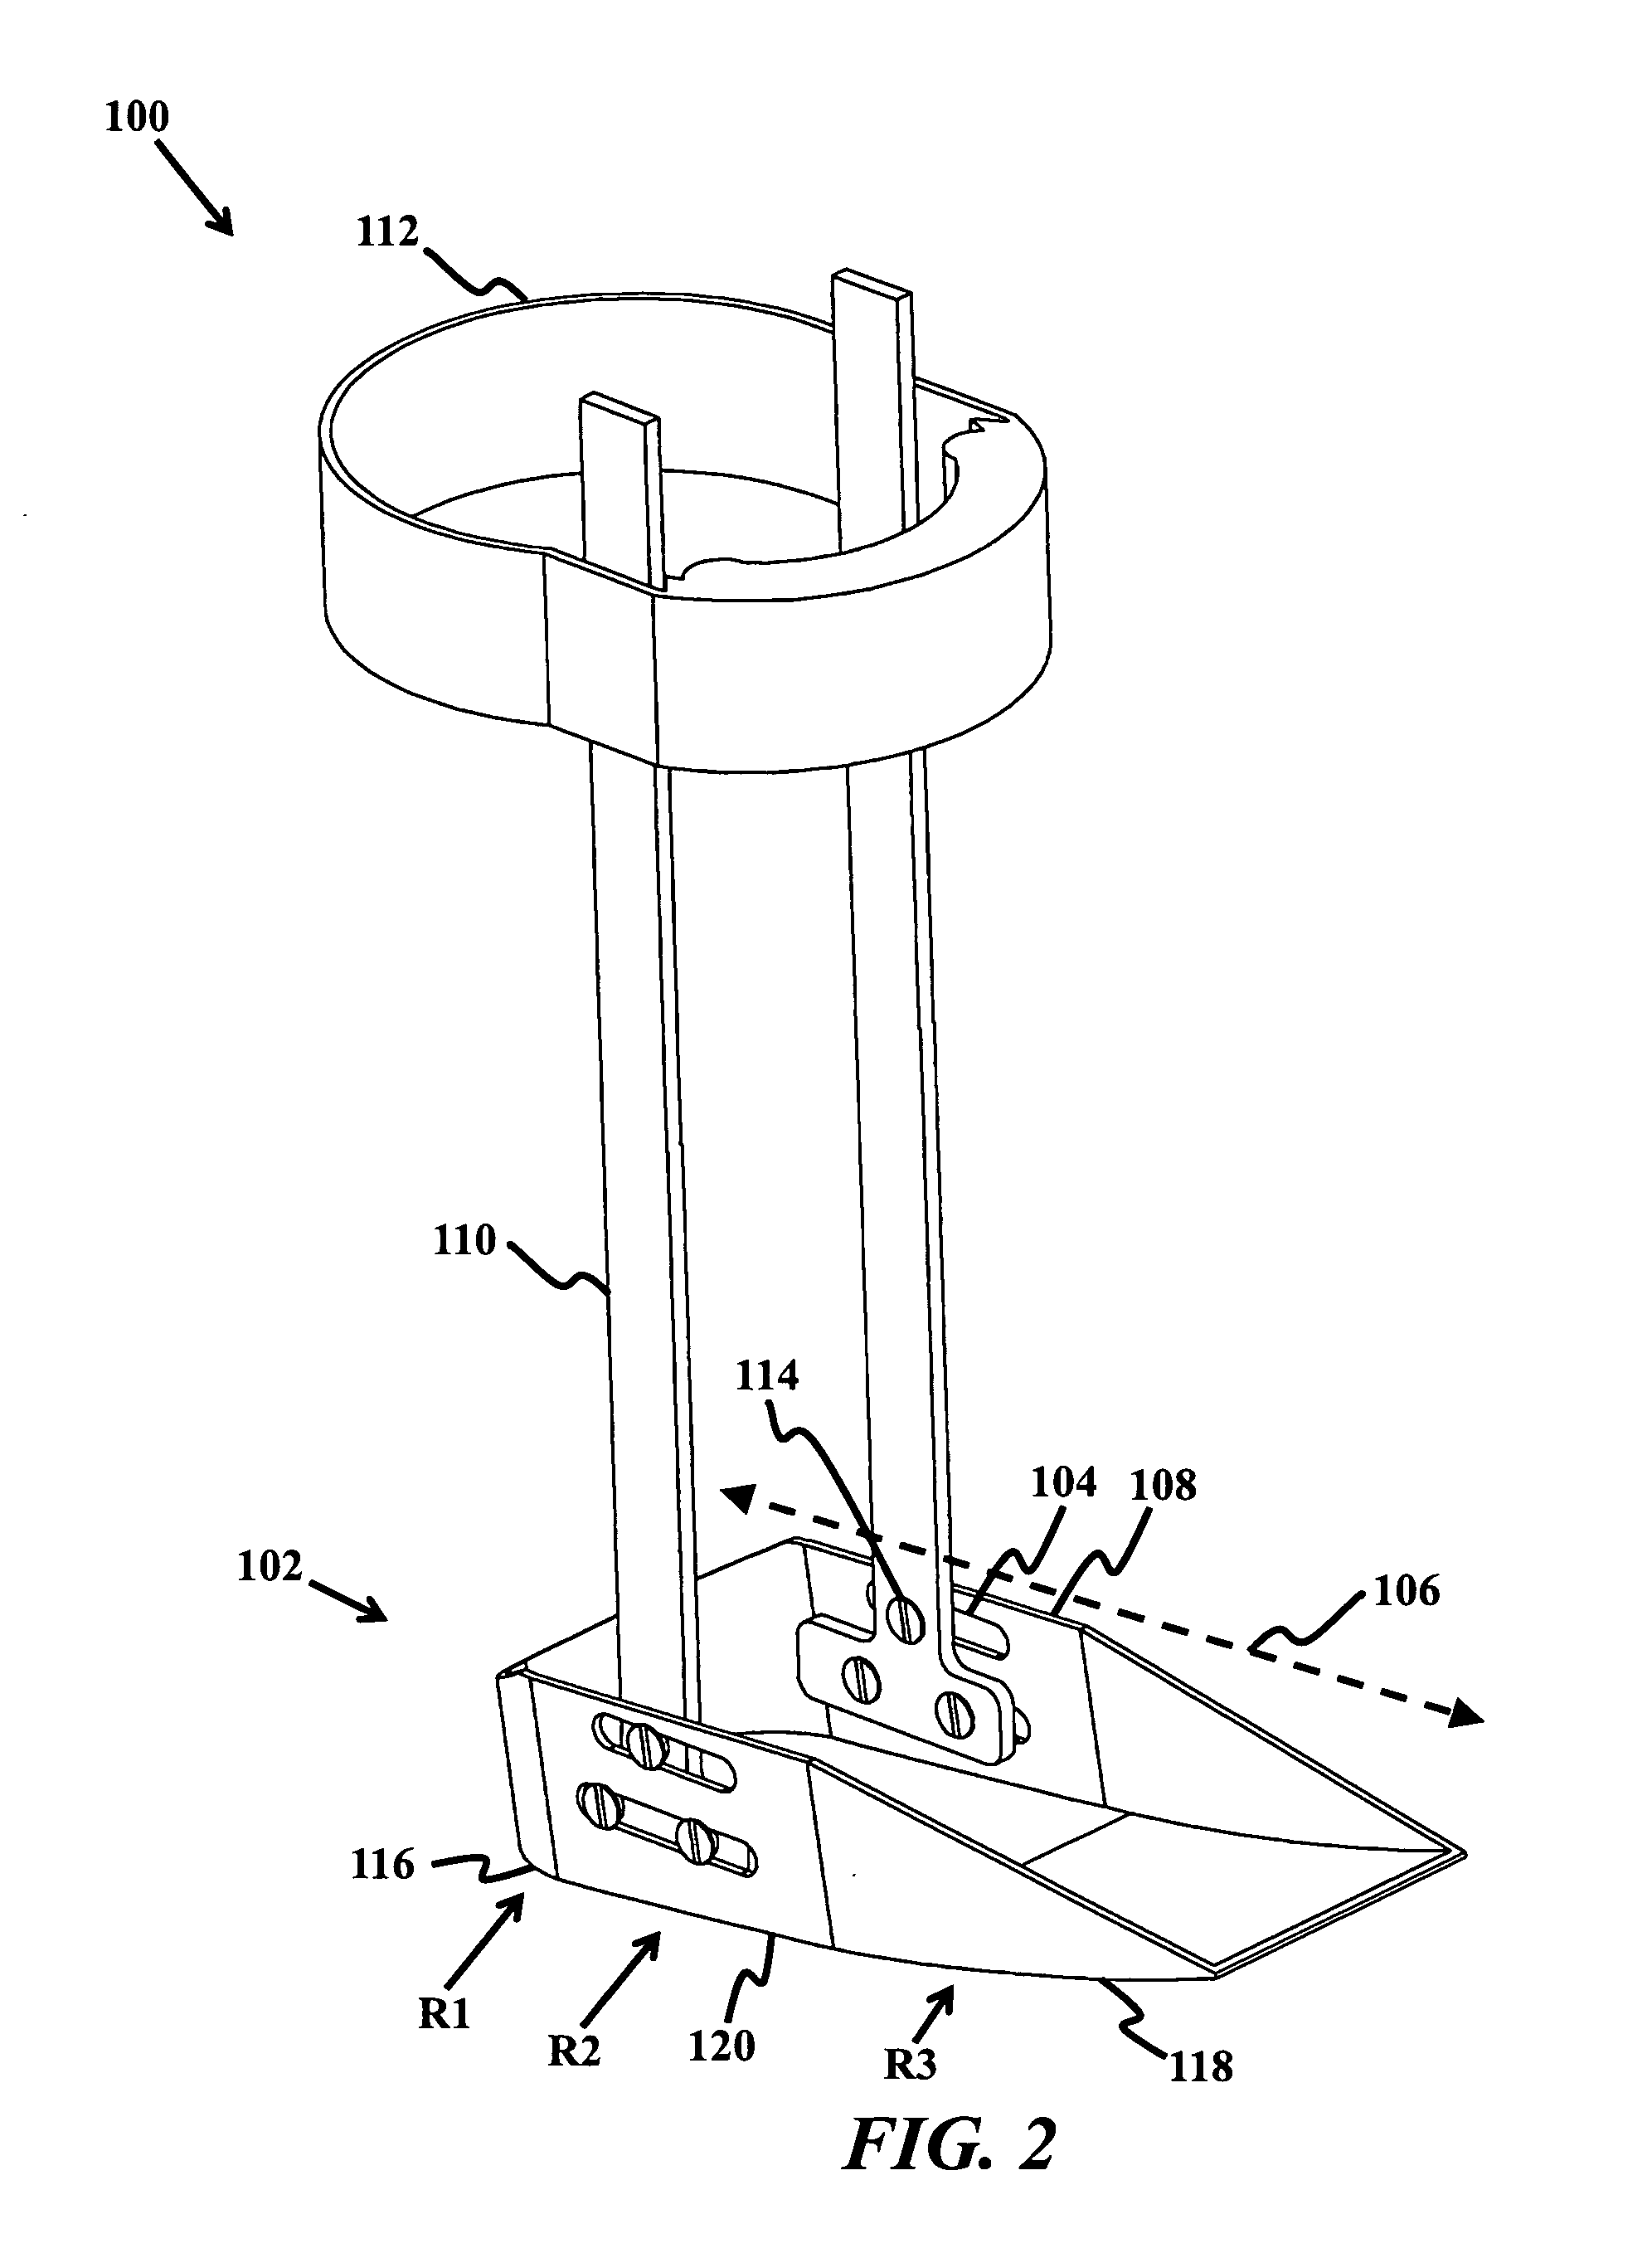 Orthotic device with sliding mechanism